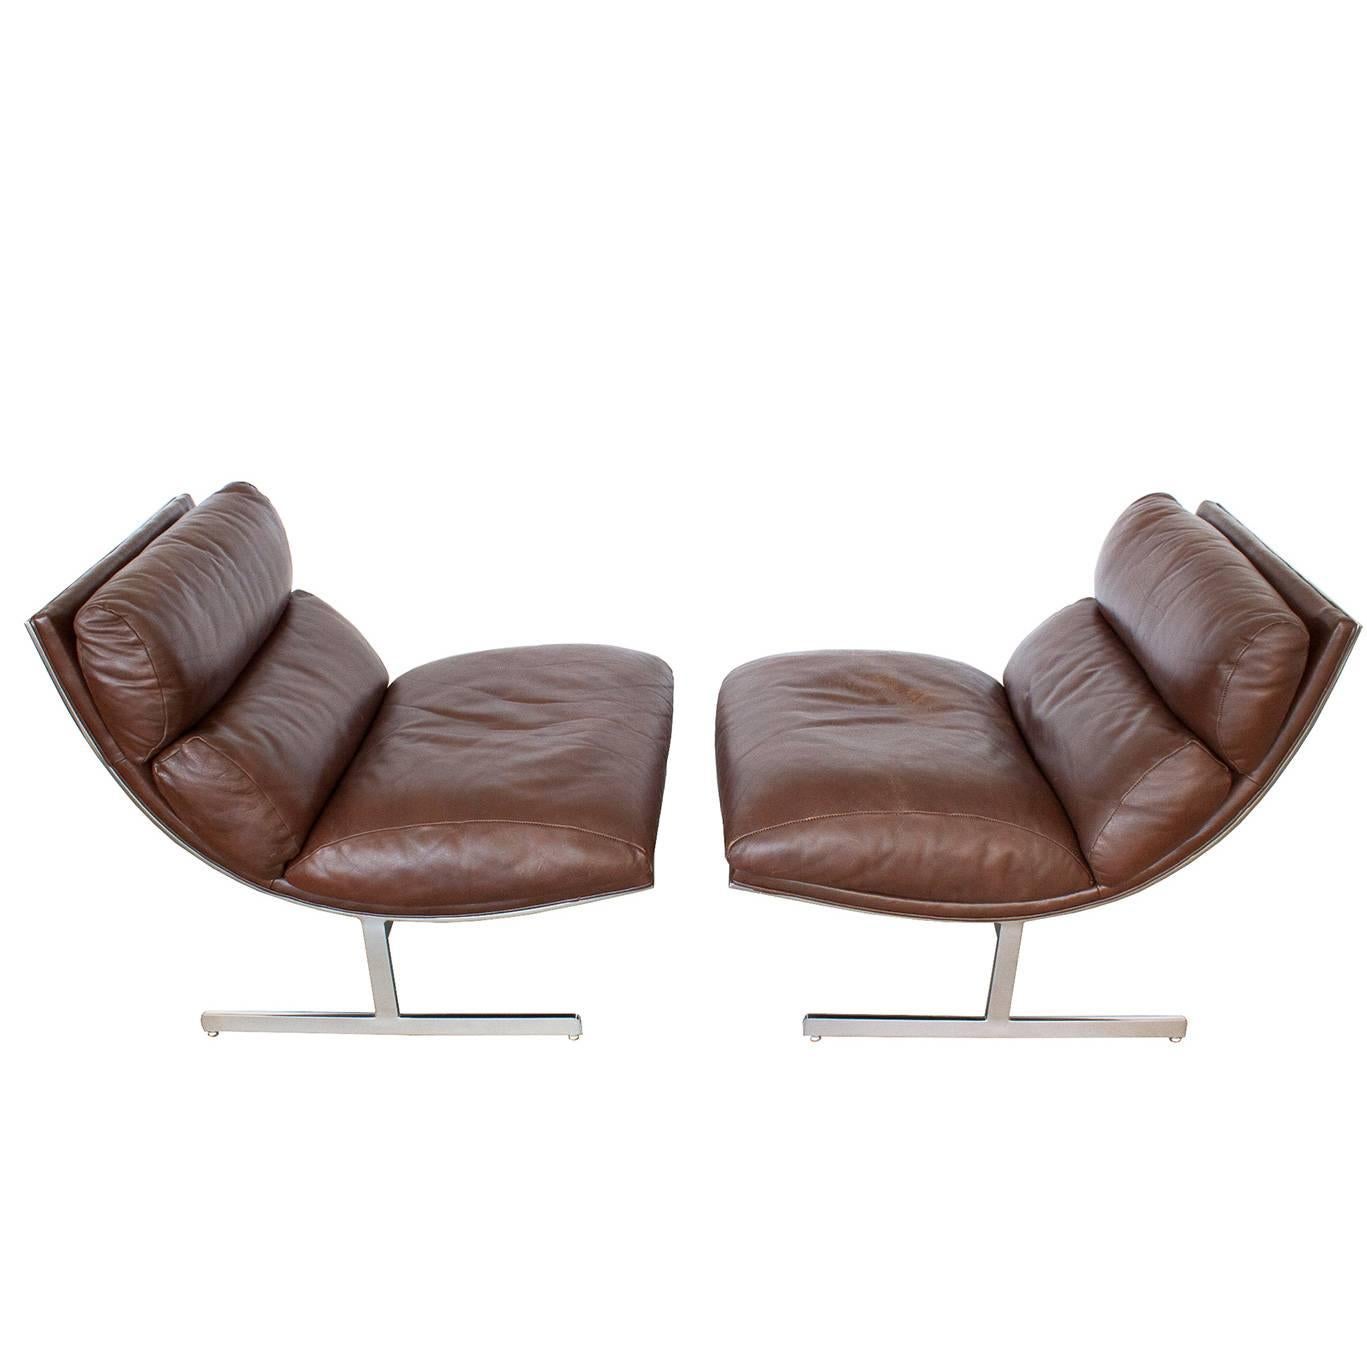 Pair of Kipp Stewart Brown Leather Lounge Chairs for Directional